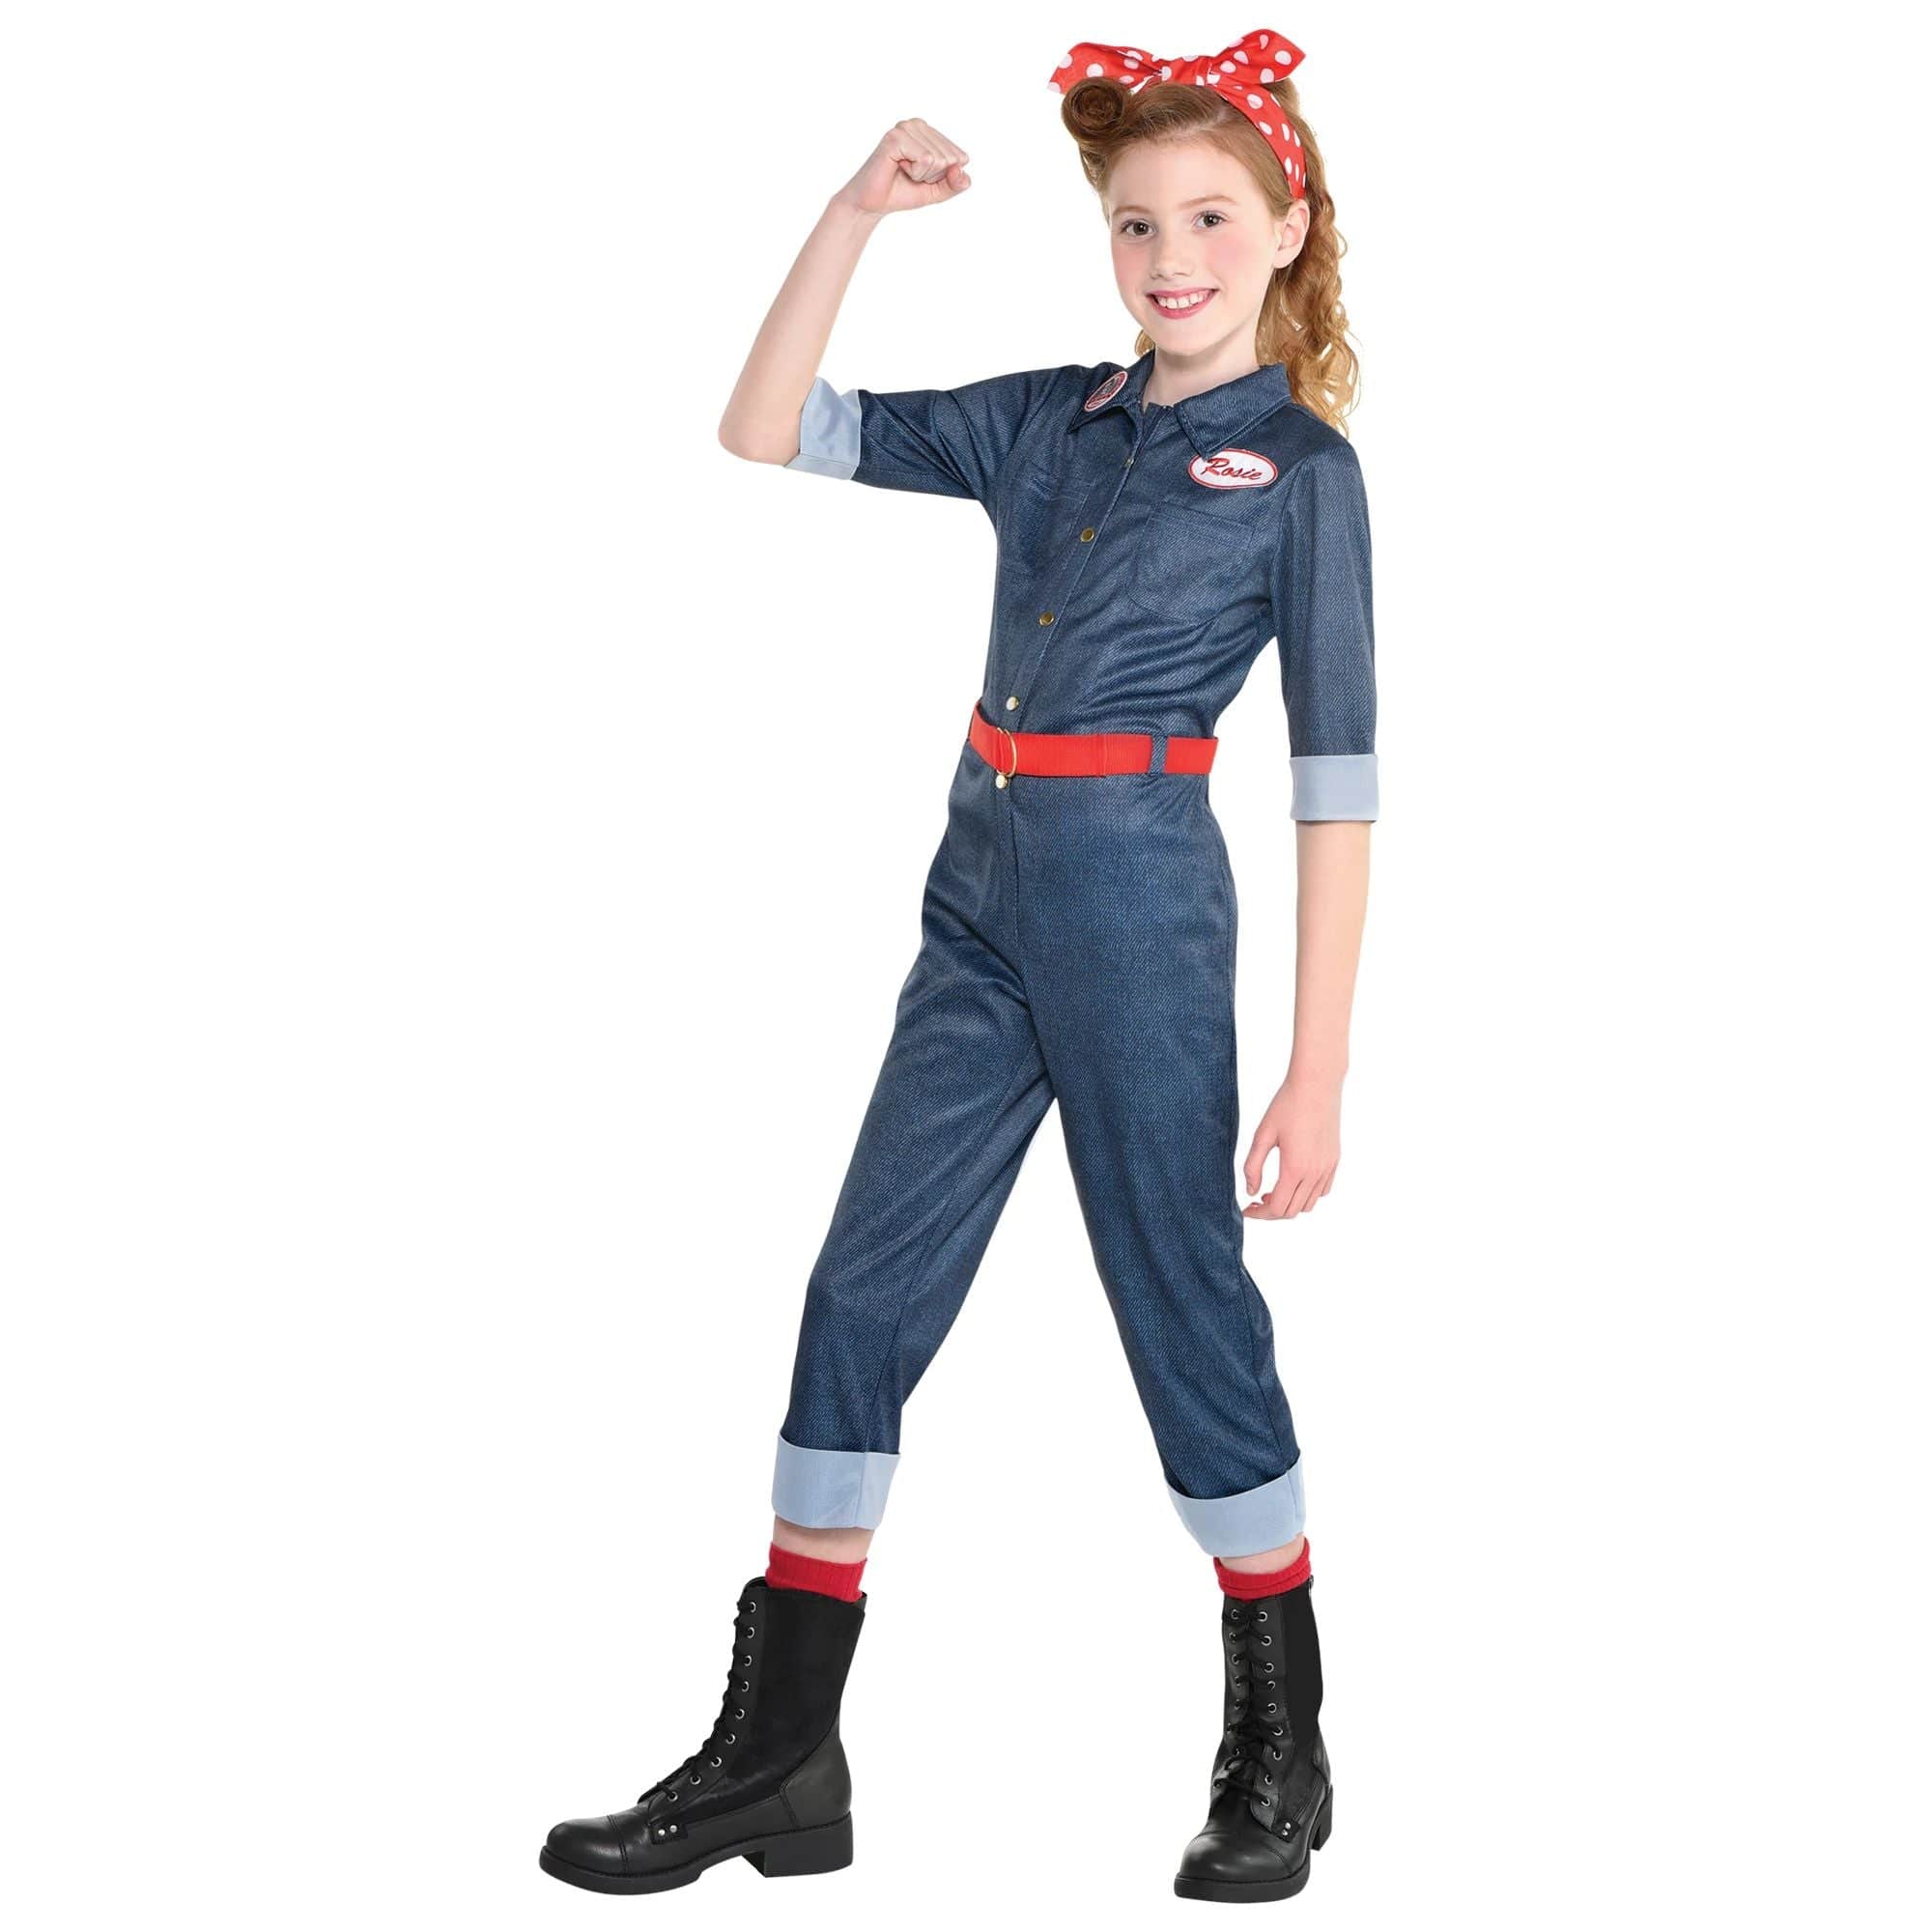 Amscan COSTUMES X-Large (14-16) Rosie The Riveter